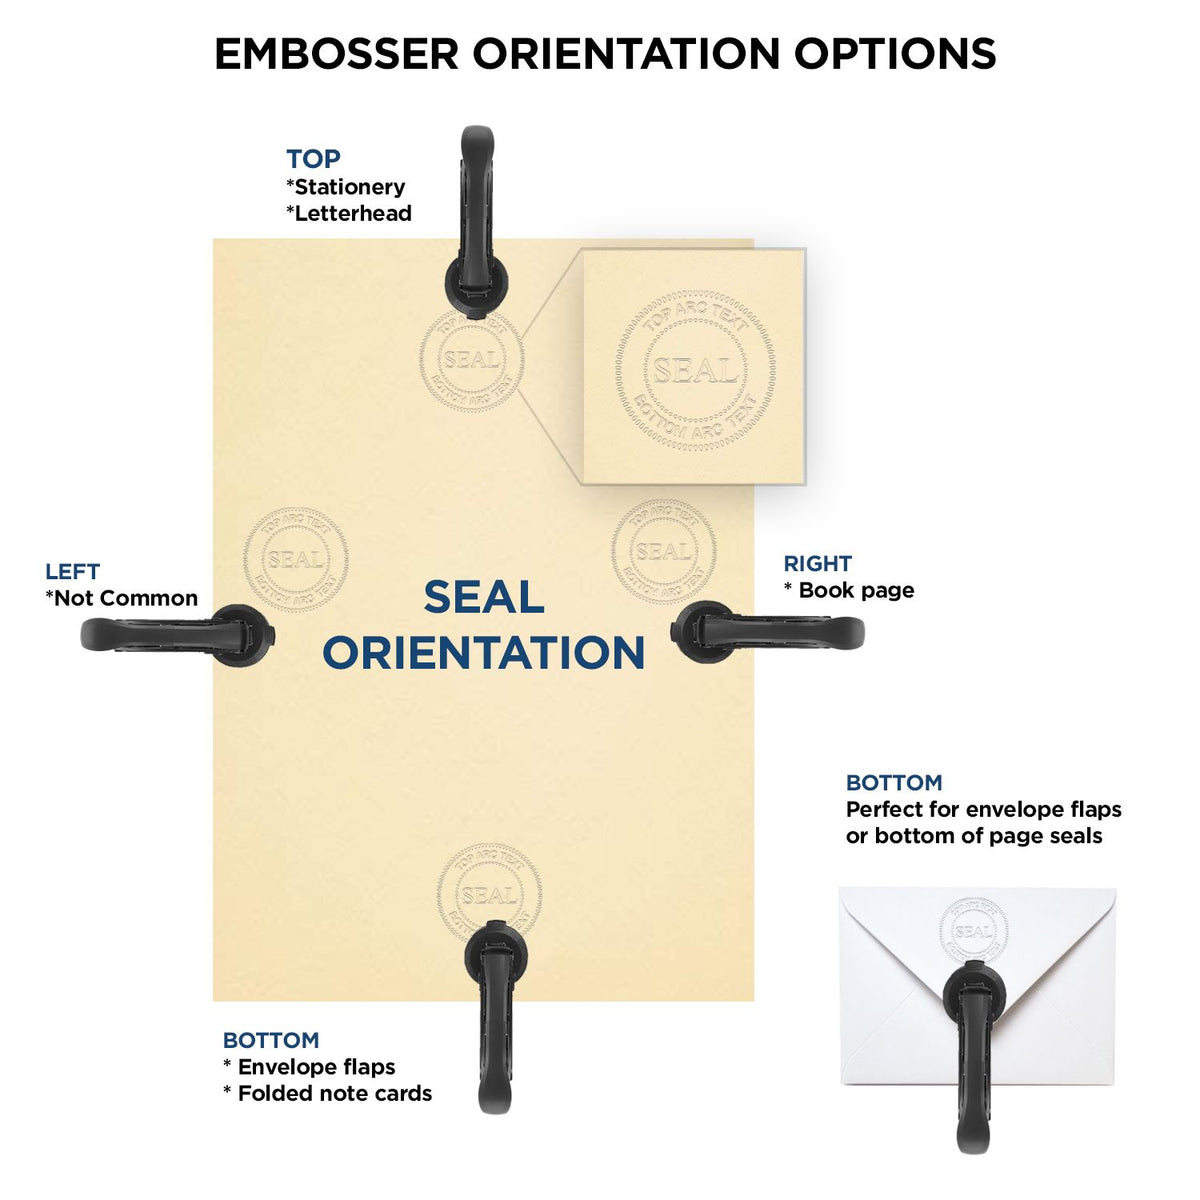 An infographic for the South Dakota Geologist Desk Seal showing embosser orientation, this is showing examples of a top, bottom, right and left insert.